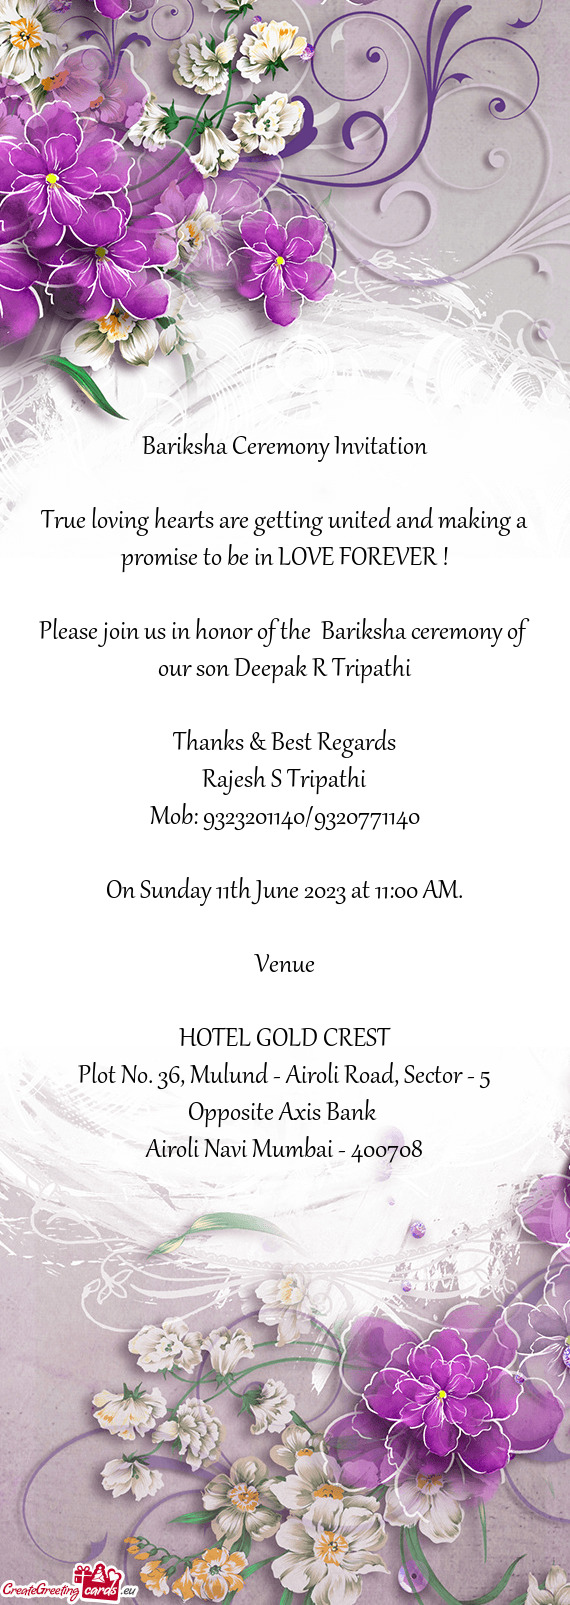 Please join us in honor of the Bariksha ceremony of our son Deepak R Tripathi